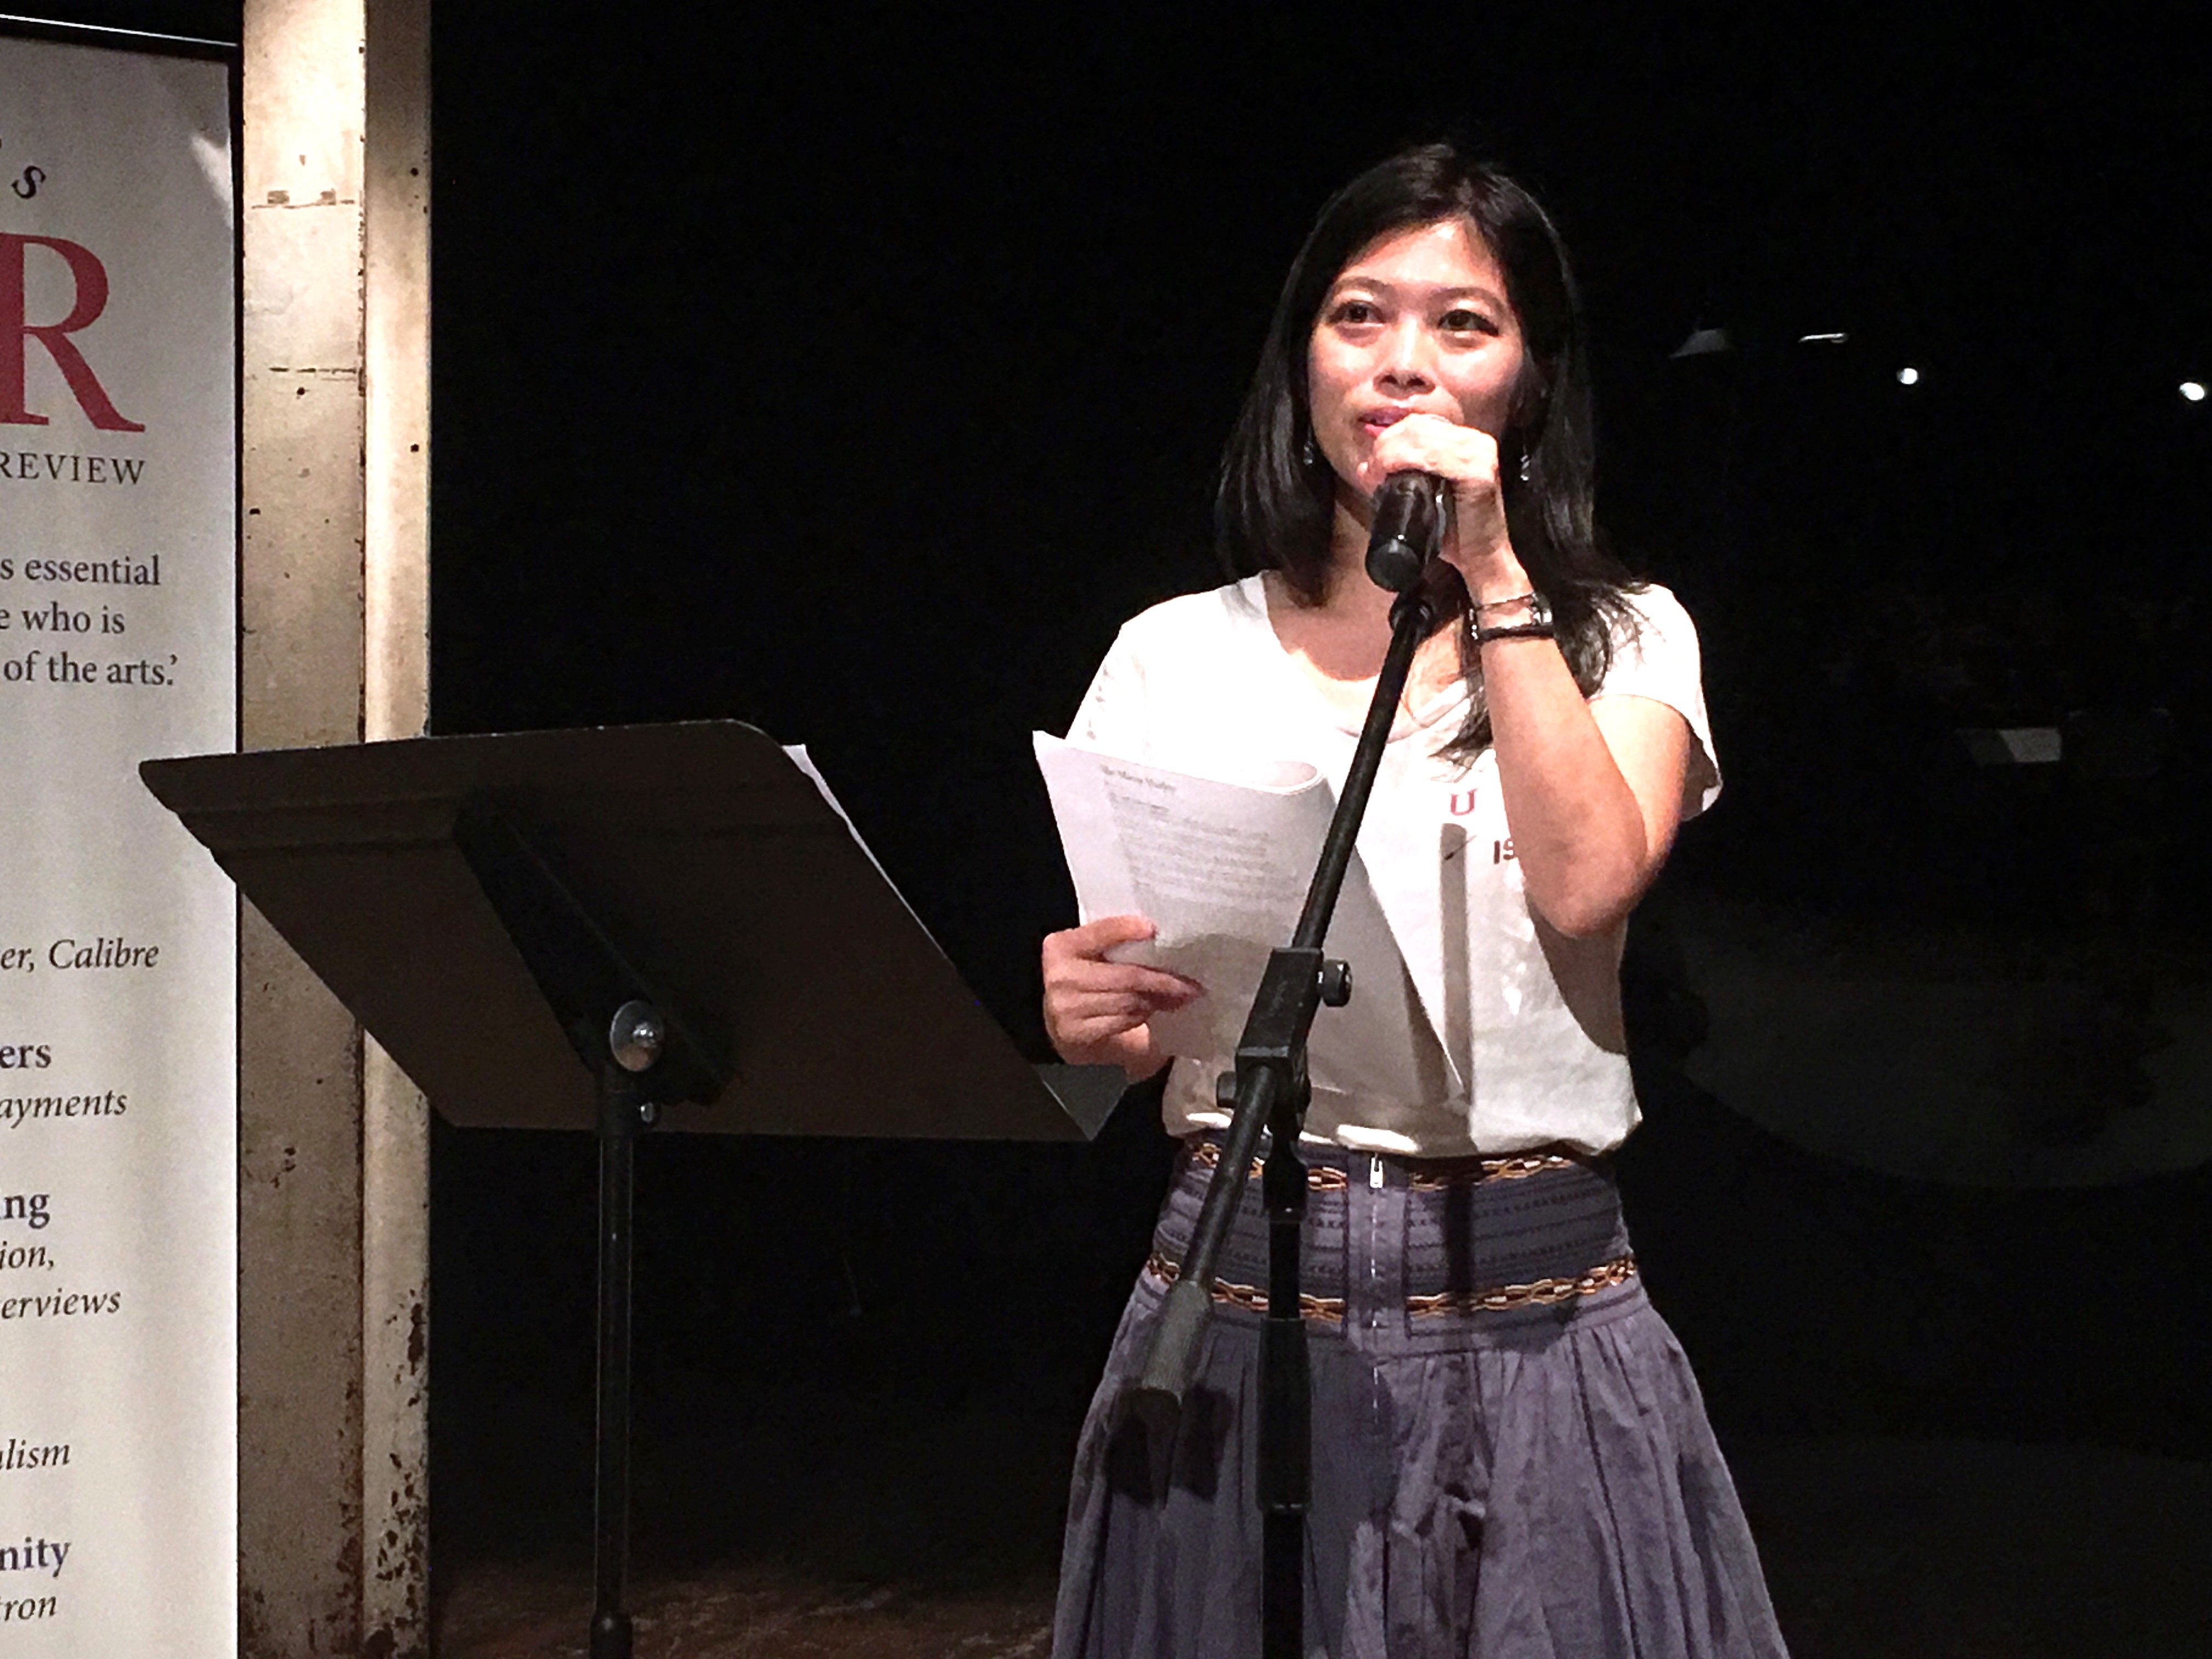 Hong Kong poet Belle Ling, who is also an assistant professor at the University of Hong Kong, says Martin Harrison’s “Summer” is “an adventurous and bold exploration of the quotidian”. Photo: Bella Ling